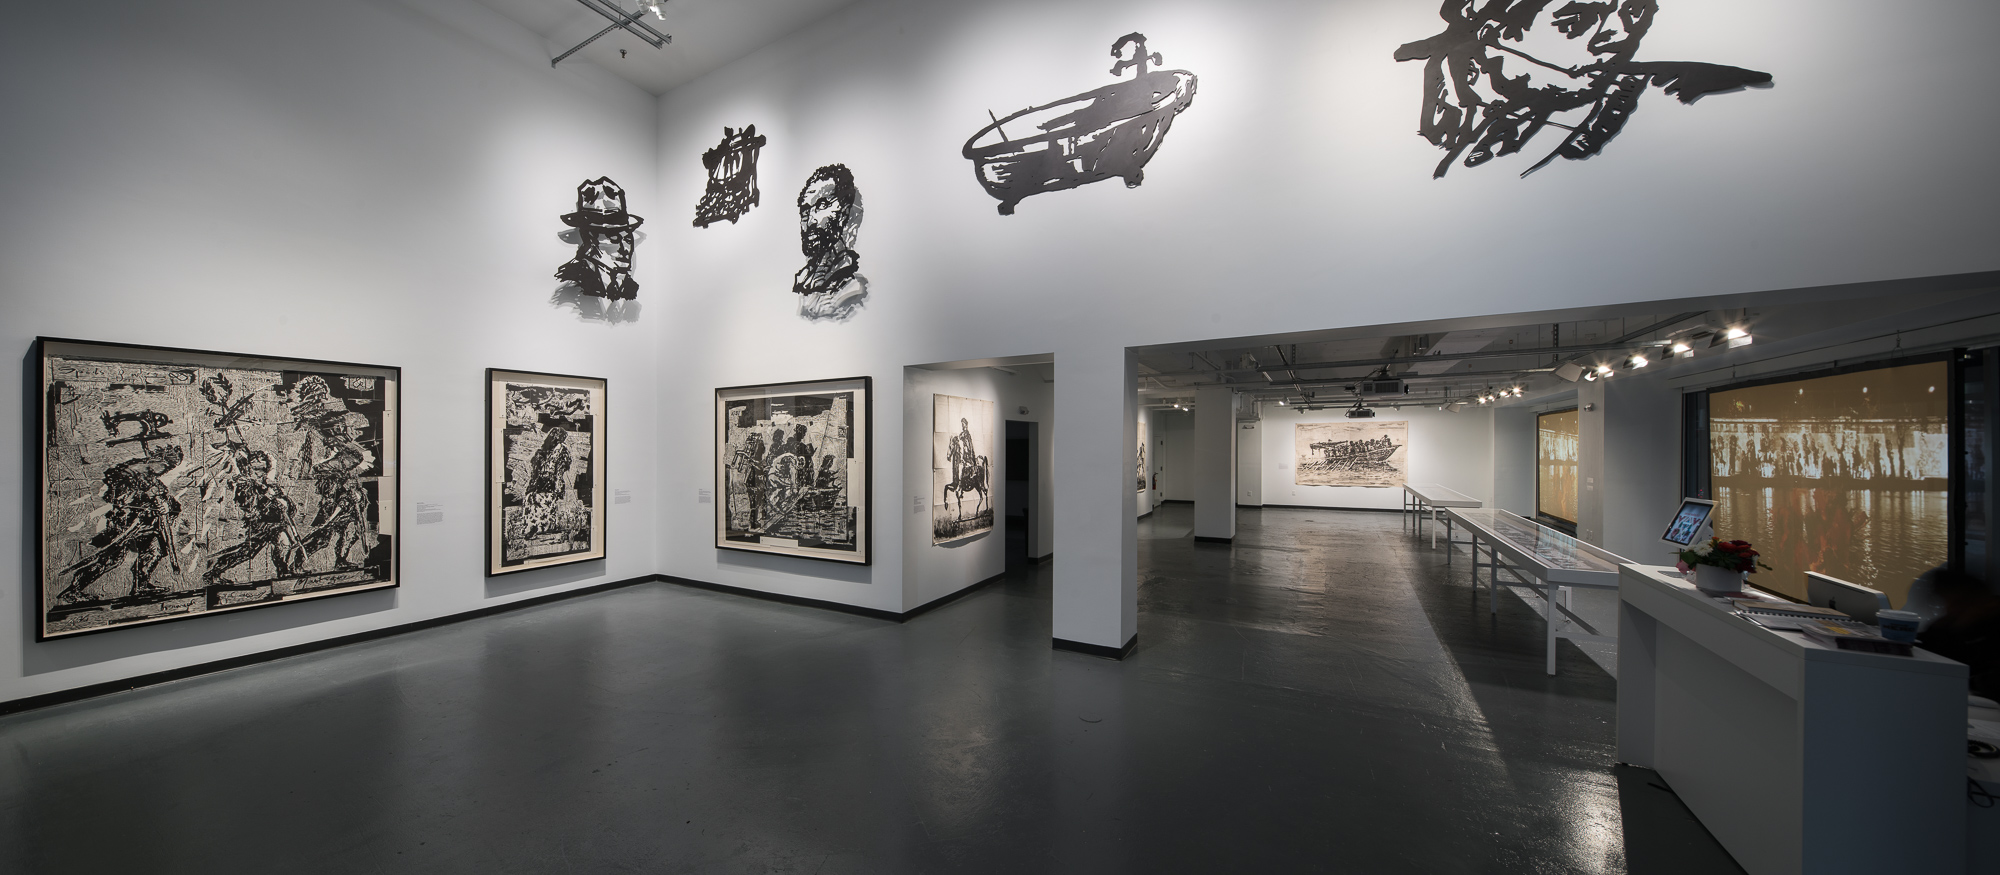 long view of gallery with images of William Kentridge's works on walls